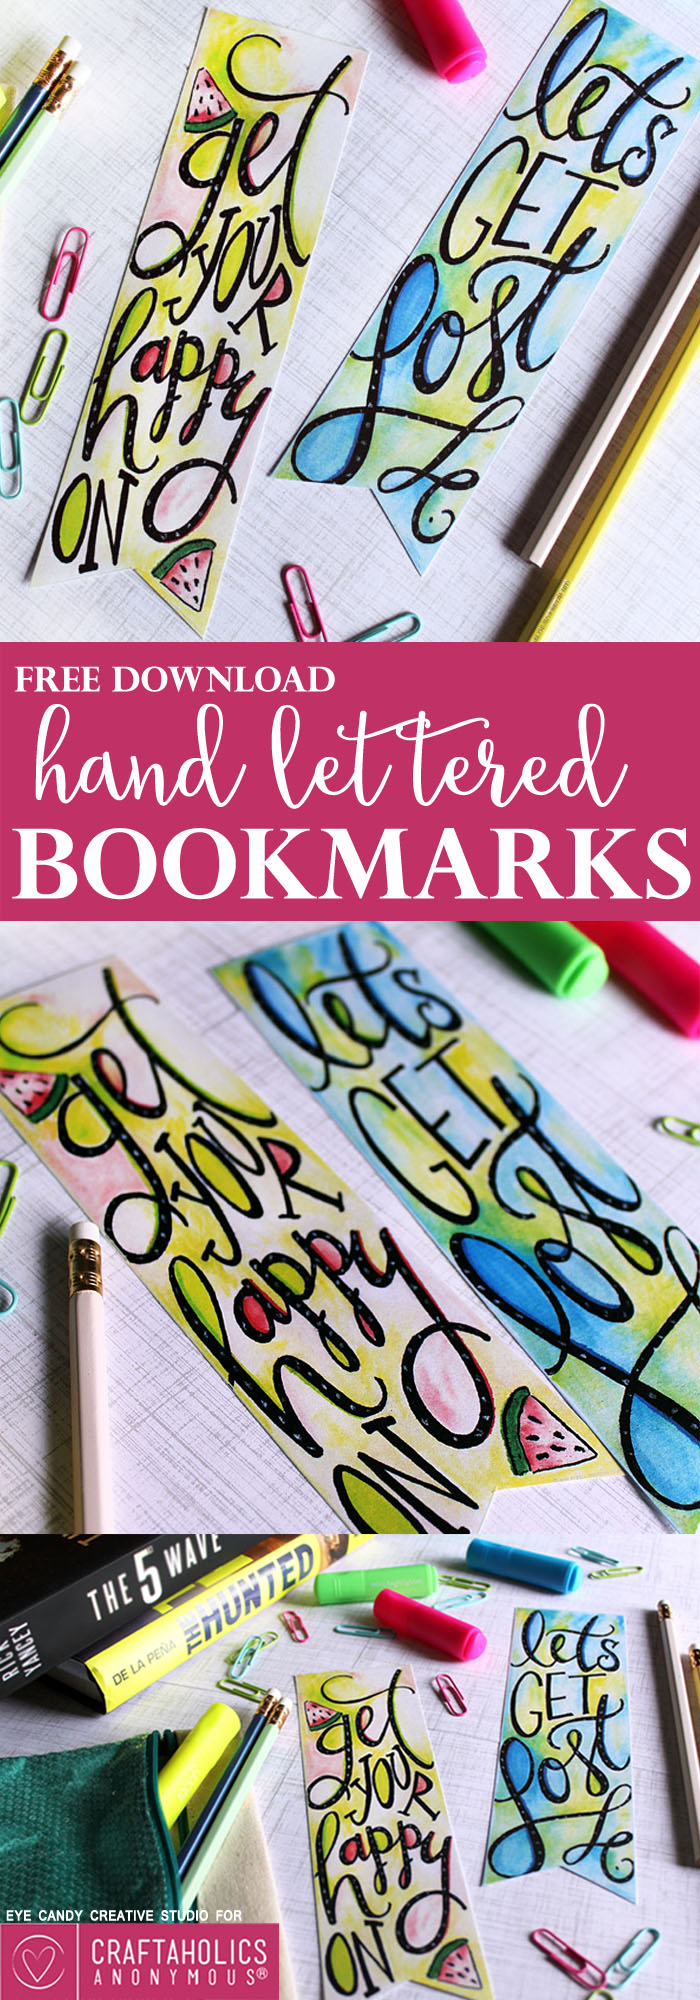 Free Printable Hand Lettered Bookmarks from craftaholicsanonymous.net